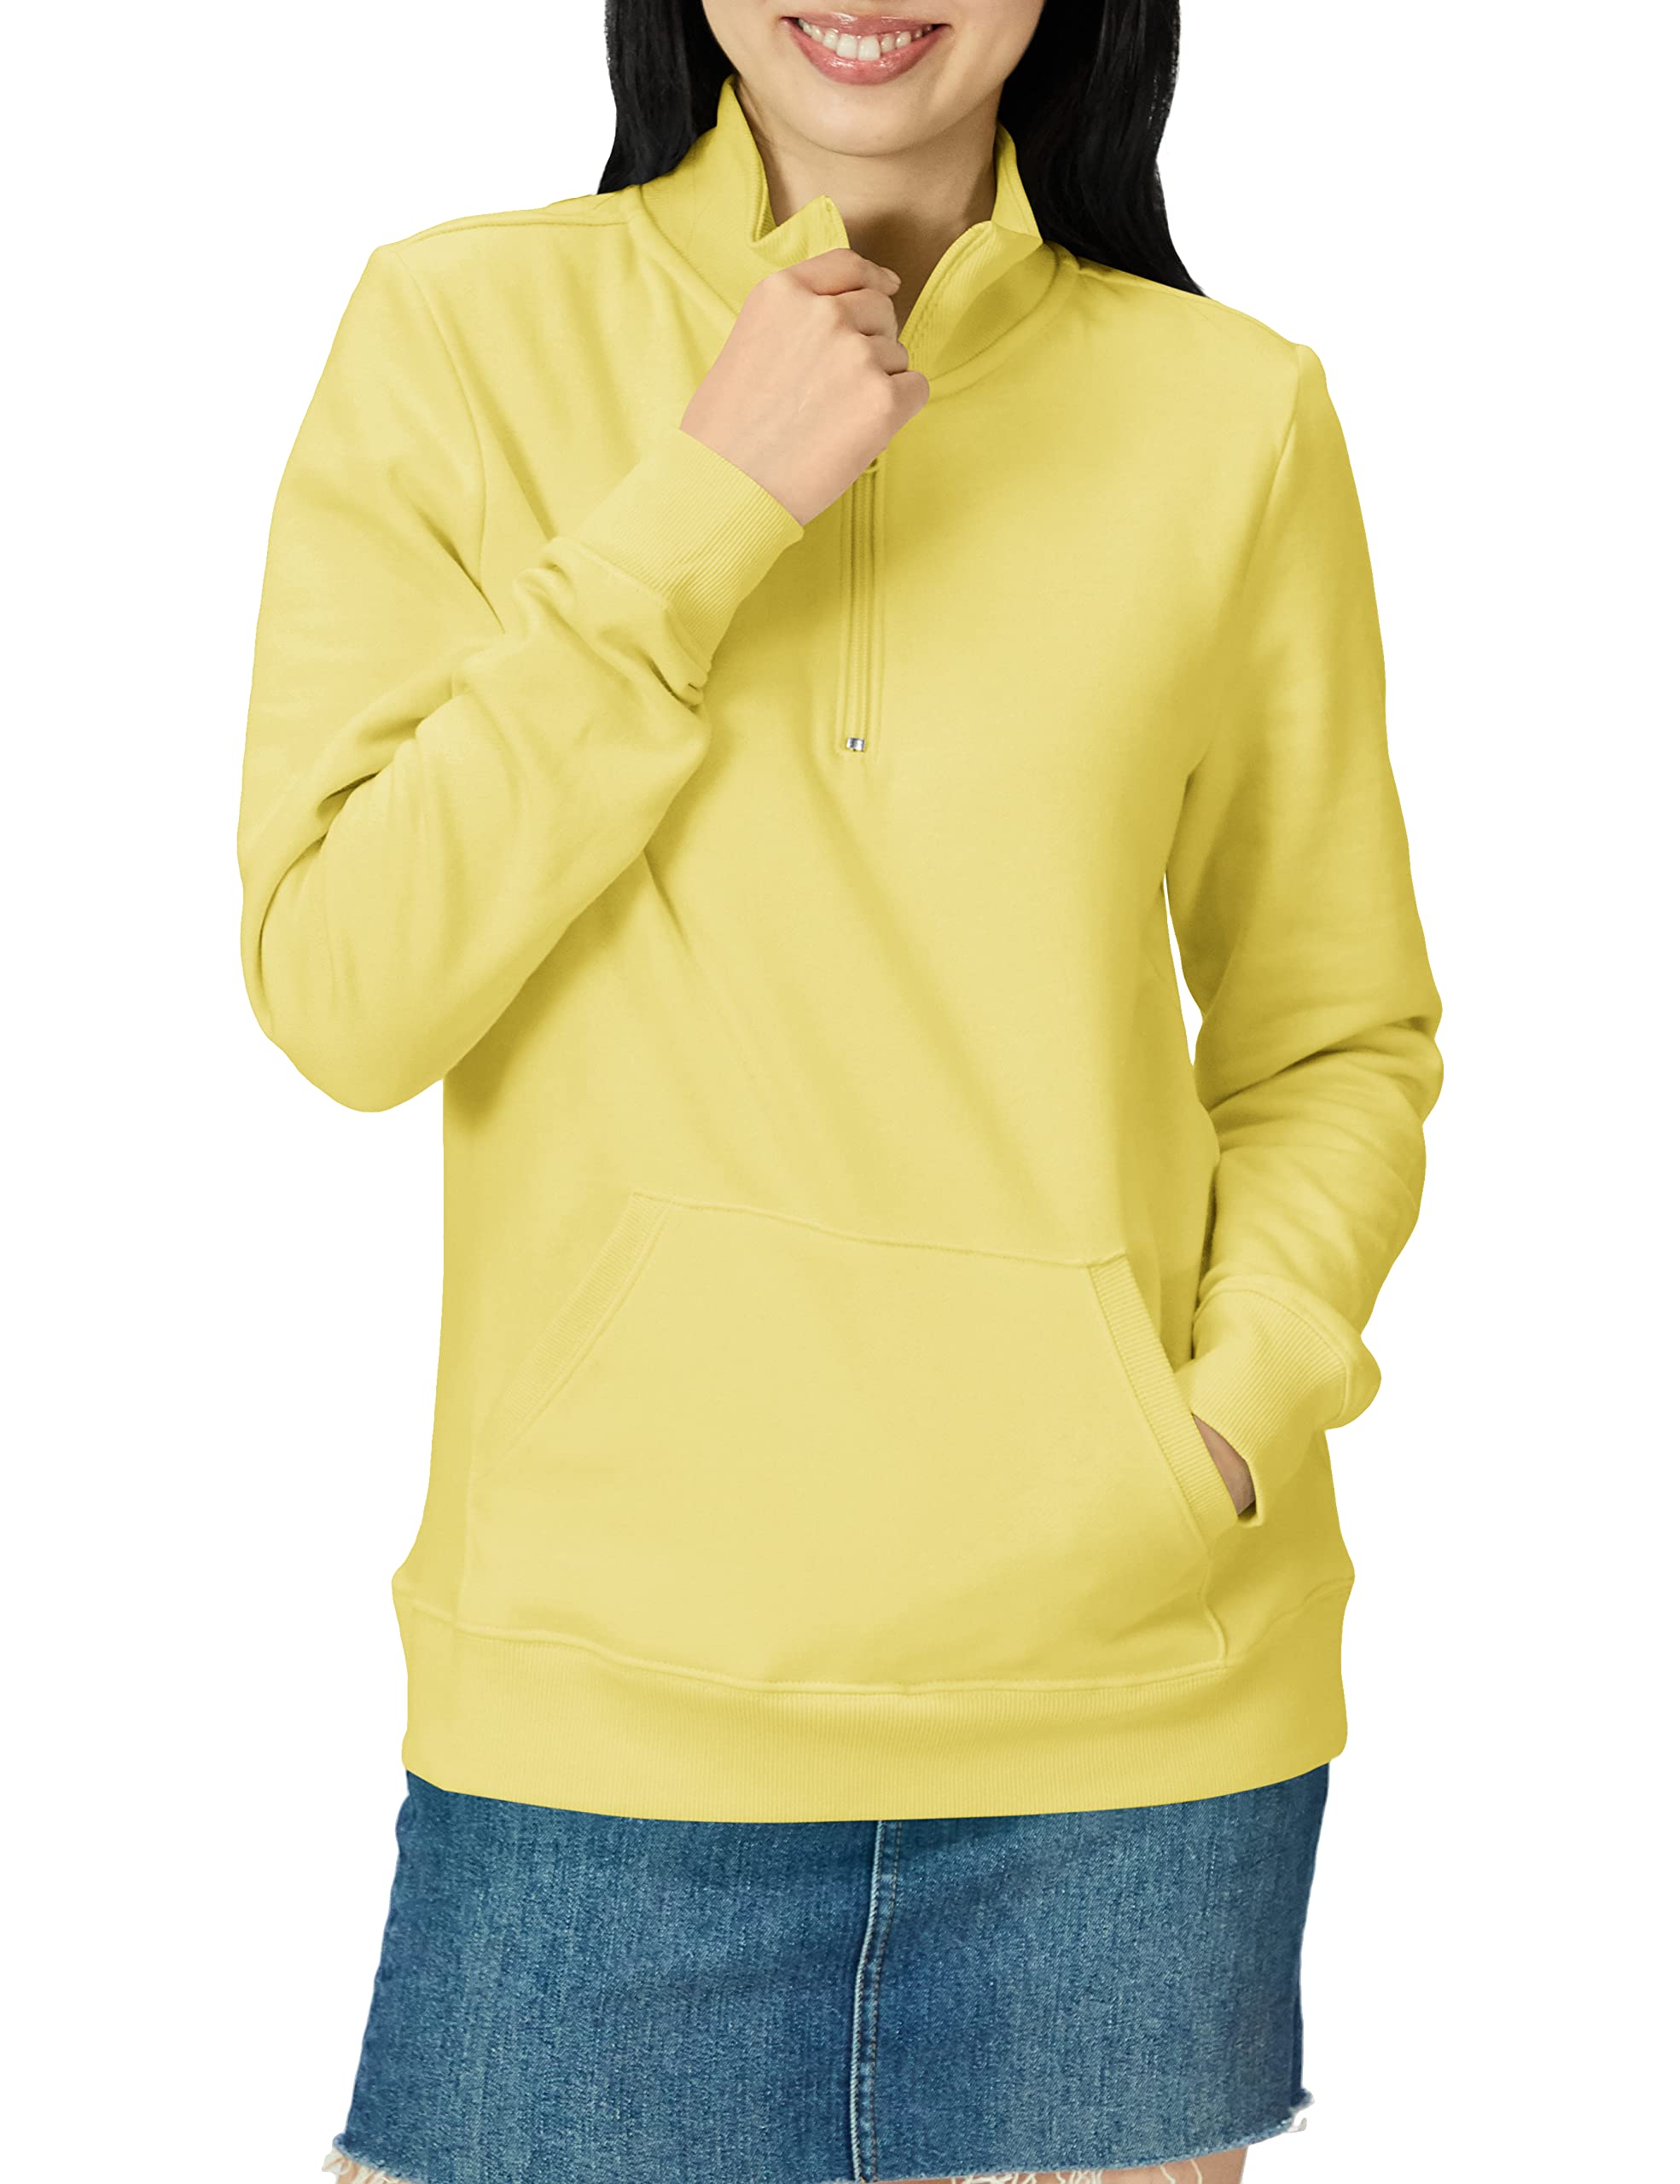 Amazon Essentials Women's Long-Sleeve Lightweight French Terry Fleece Quarter-Zip Top (Available in Plus Size)